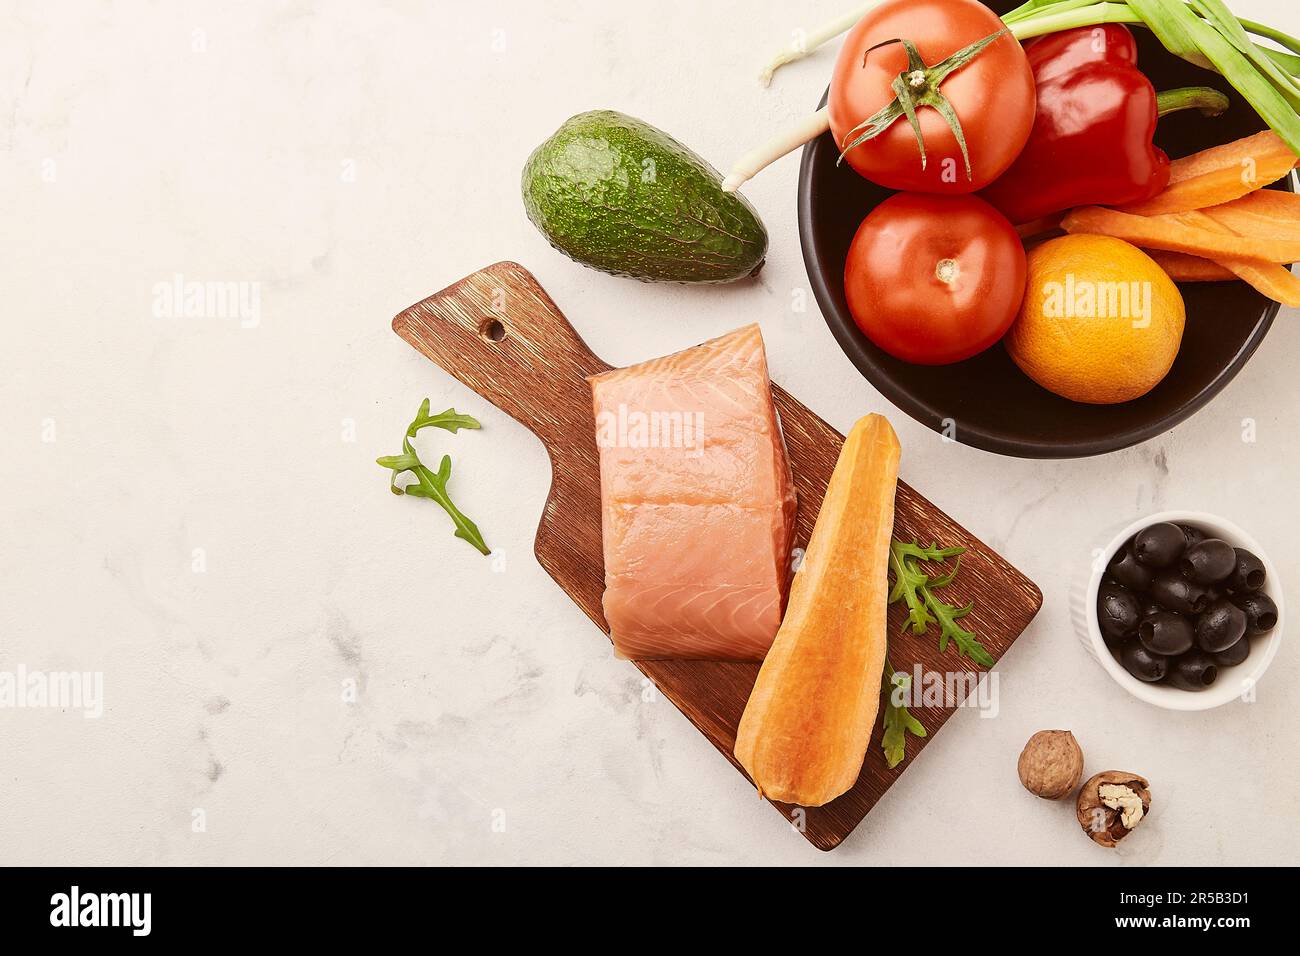 FODMAP, low carb, keto diet -vegetables and fruits, smoked salmon, greens, nuts, olives with copy space. Stock Photo